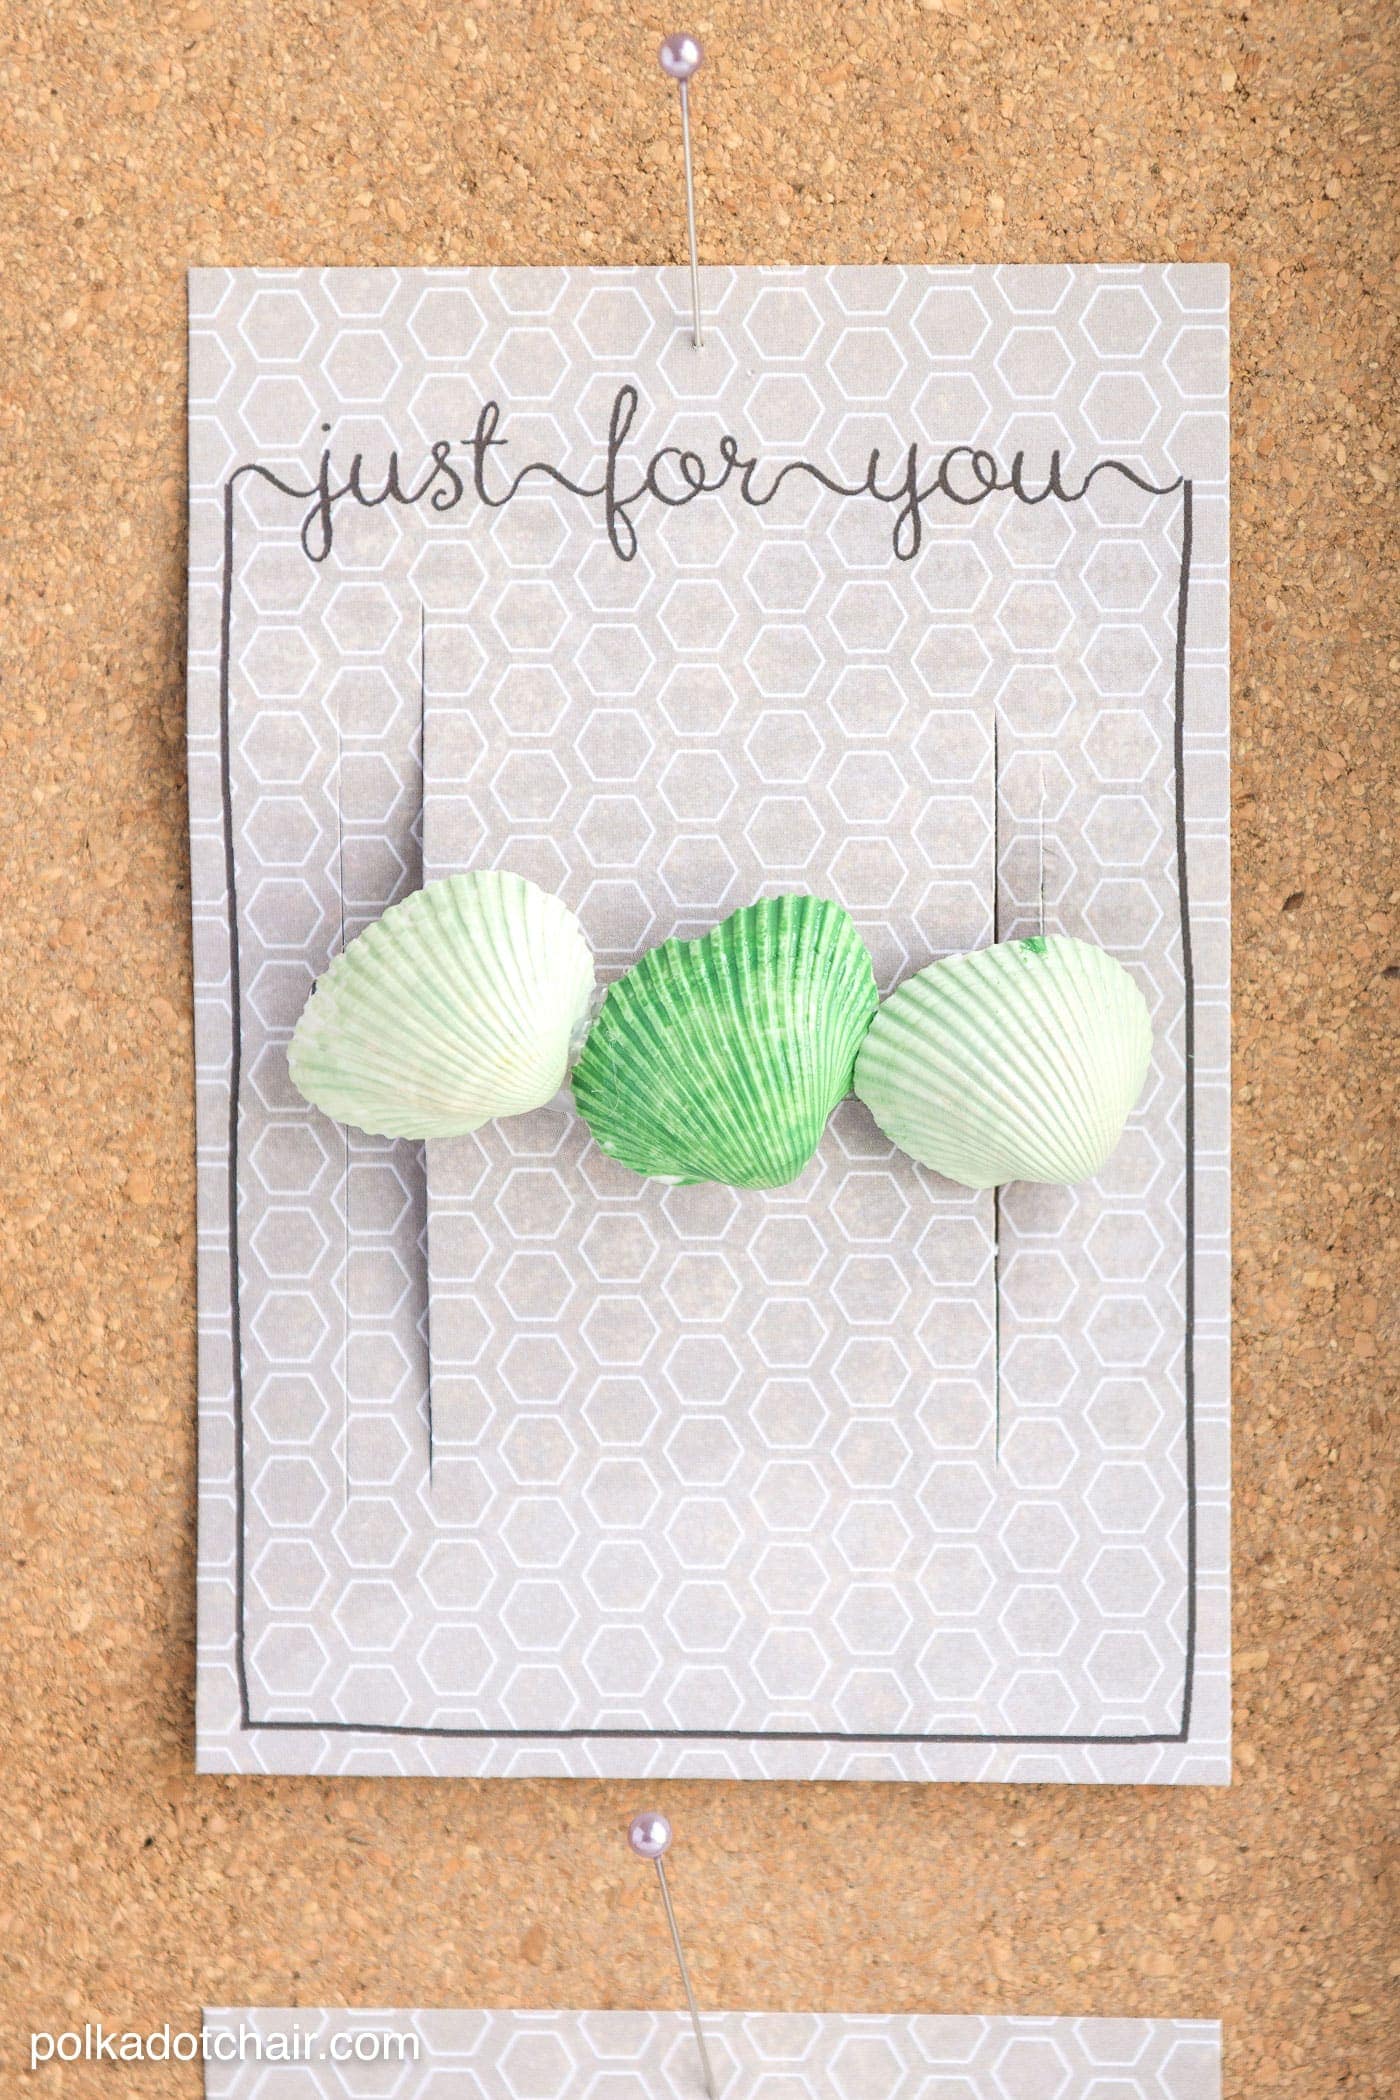 Seashell Craft Ideas and free printable gift tags. This craft idea would be great for kids especially on a rainy summer day